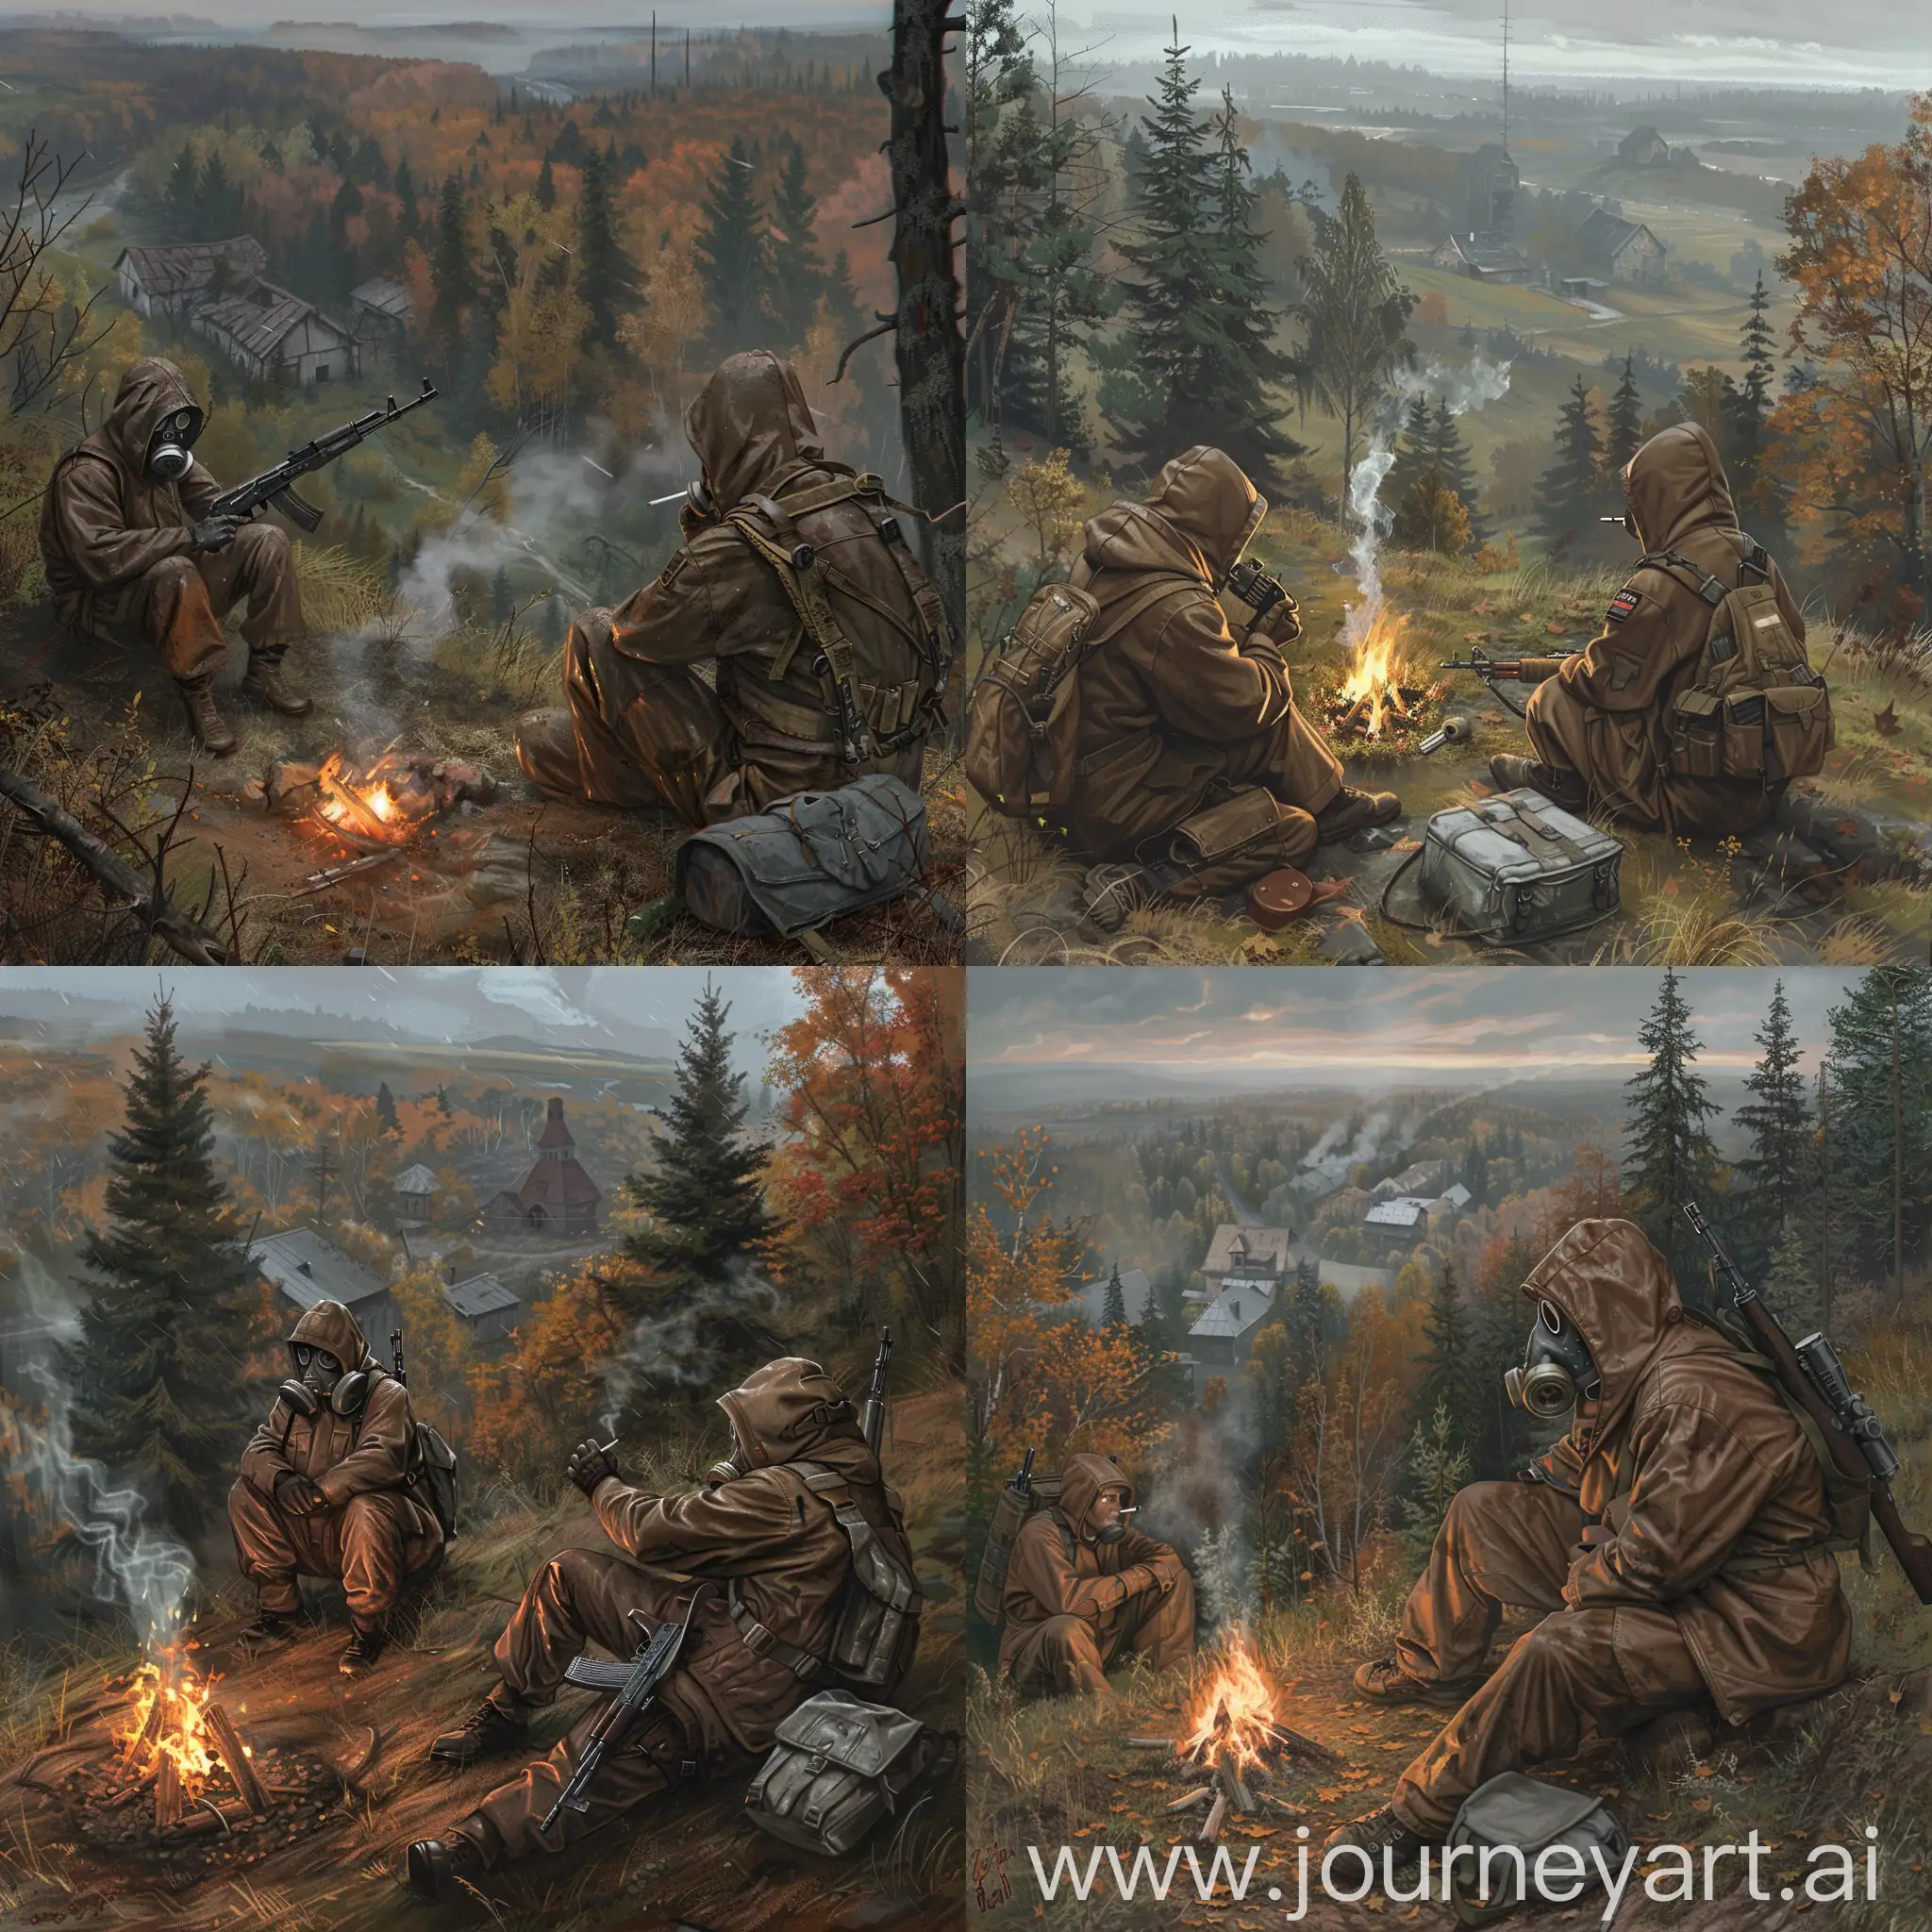 Stalker art, two stalkers are sitting on a hill by a campfire, the first stalker is wearing a brown raincoat with a gasmask on his face, he has a rifle in his hands, the second stalker is smoking a cigarette, dressed in a brown military jumpsuit, a small gray backpack lies next to him, the weather is gloomy autumn, from the hill, where the stalkers are sitting, there is a view of the forest and an abandoned Soviet village standing in the distance.